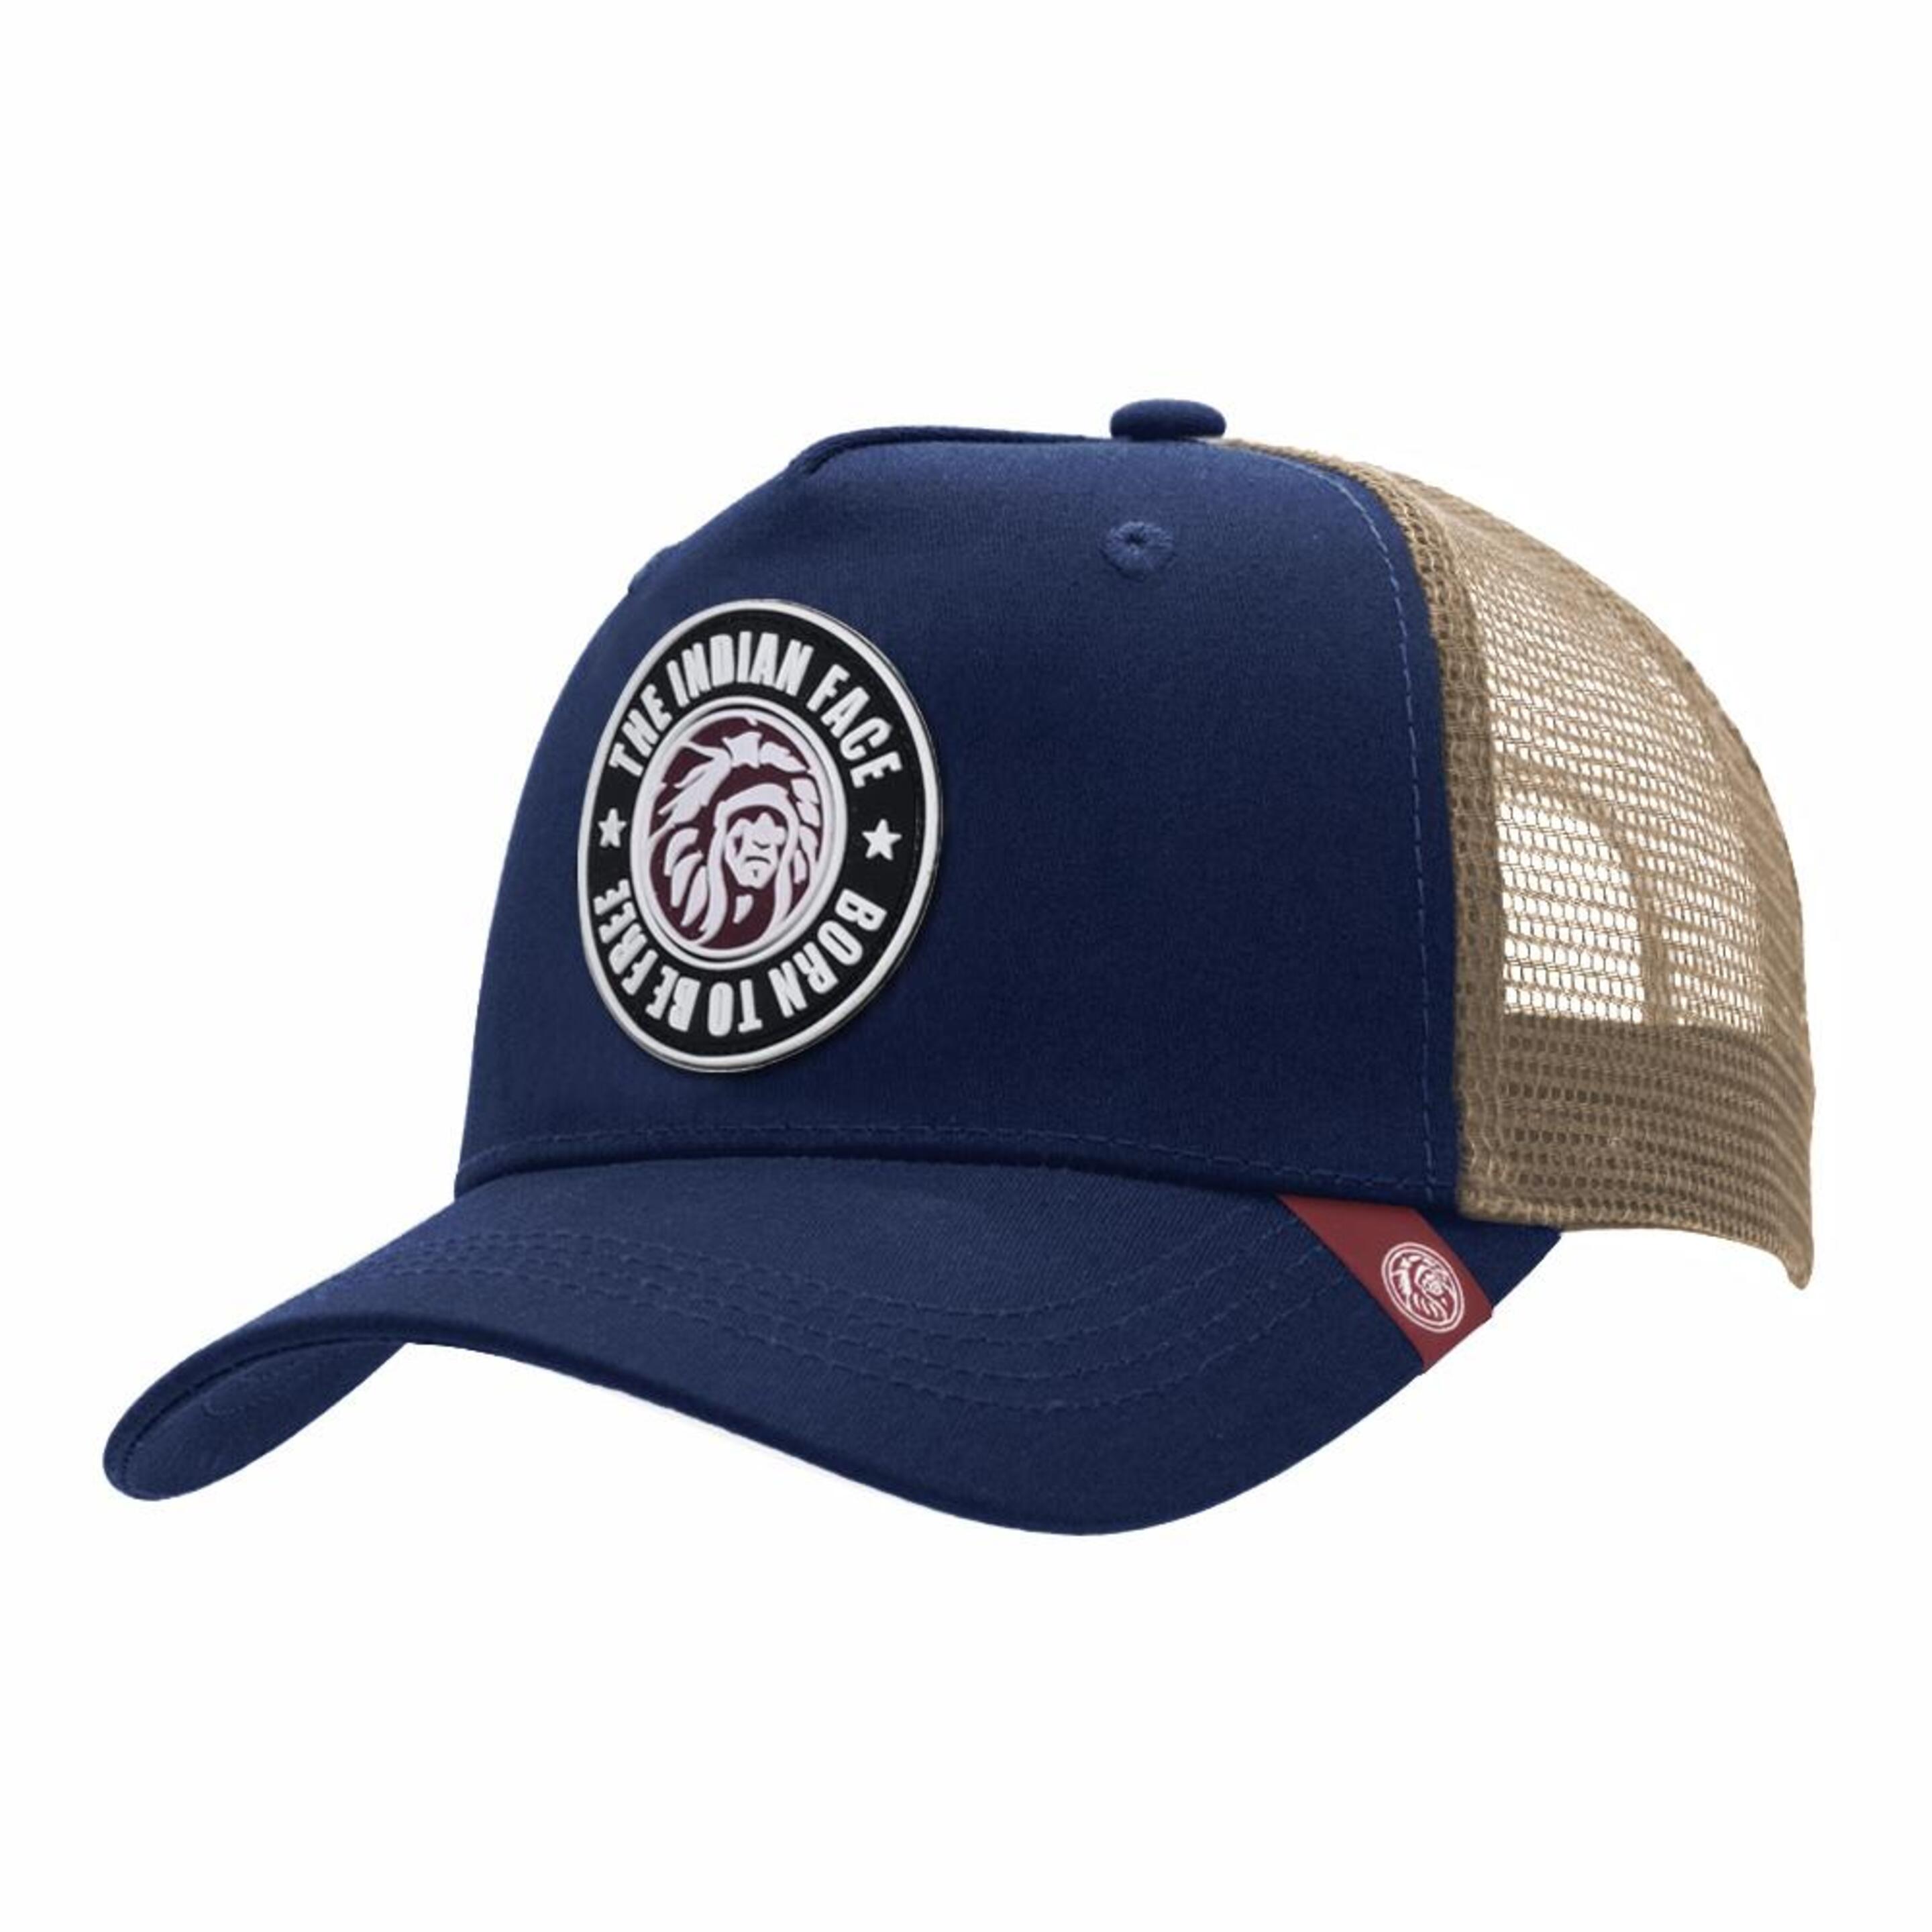 Gorra Trucker Born To Be Free Azul The Indian Face Para Hombre Y Mujer